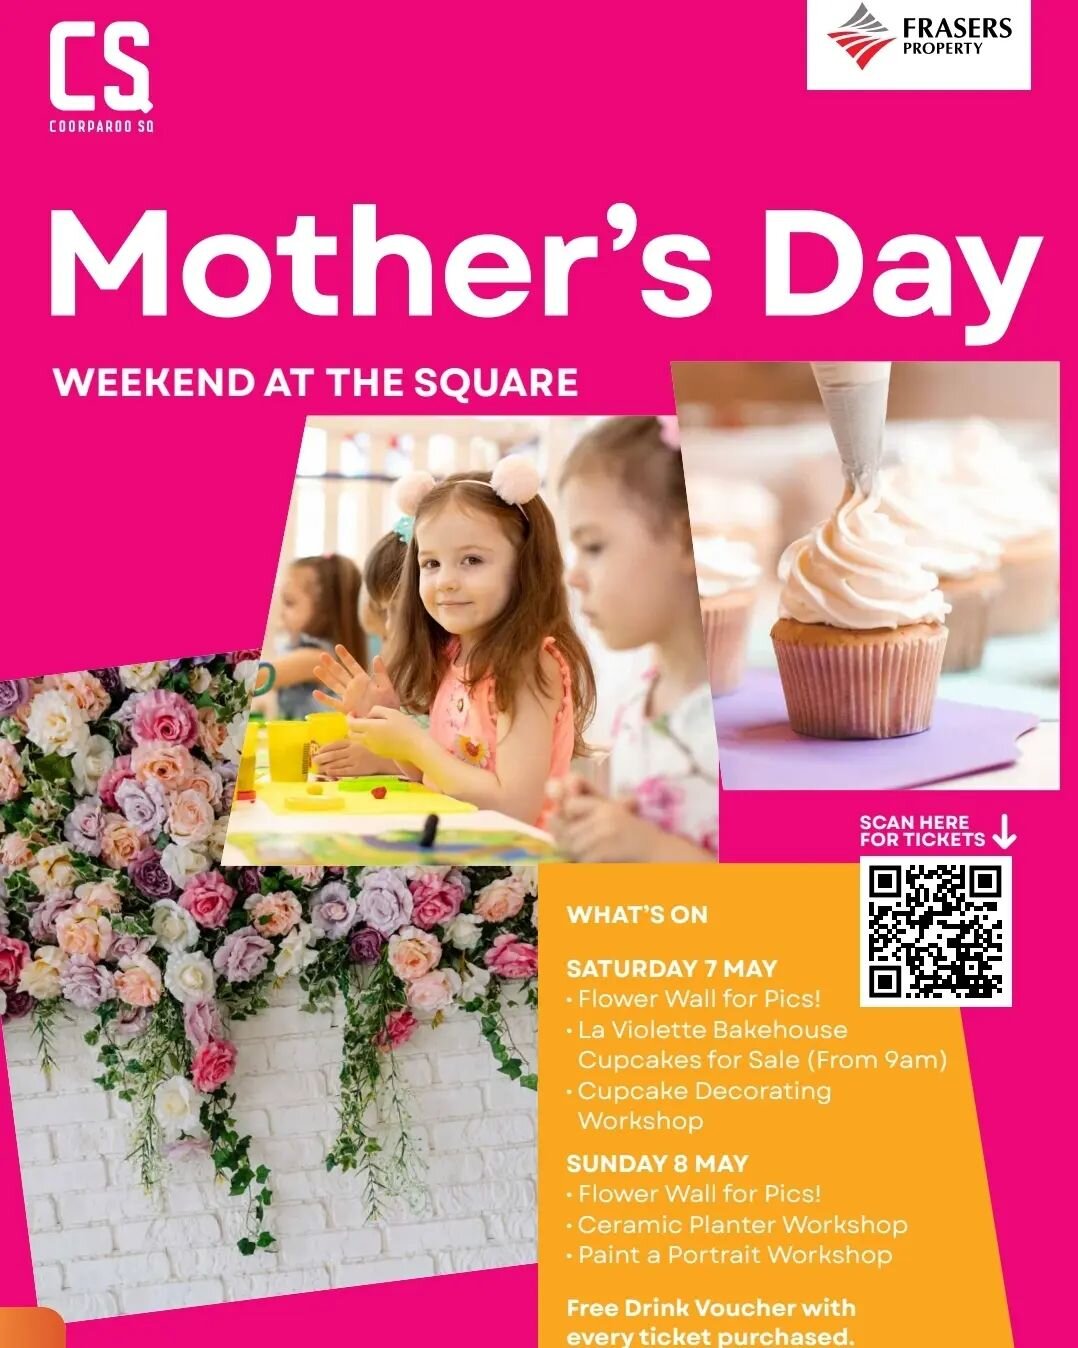 MOTHER'S DAY celebration this weekend @coorparoosquare
We will be holding a cupcake stall on Saturday 7th May selling our delicious and beautifully decorated cupcakes and some super cute cookies.
We will also be hosting a kids cupcake workshop, booki